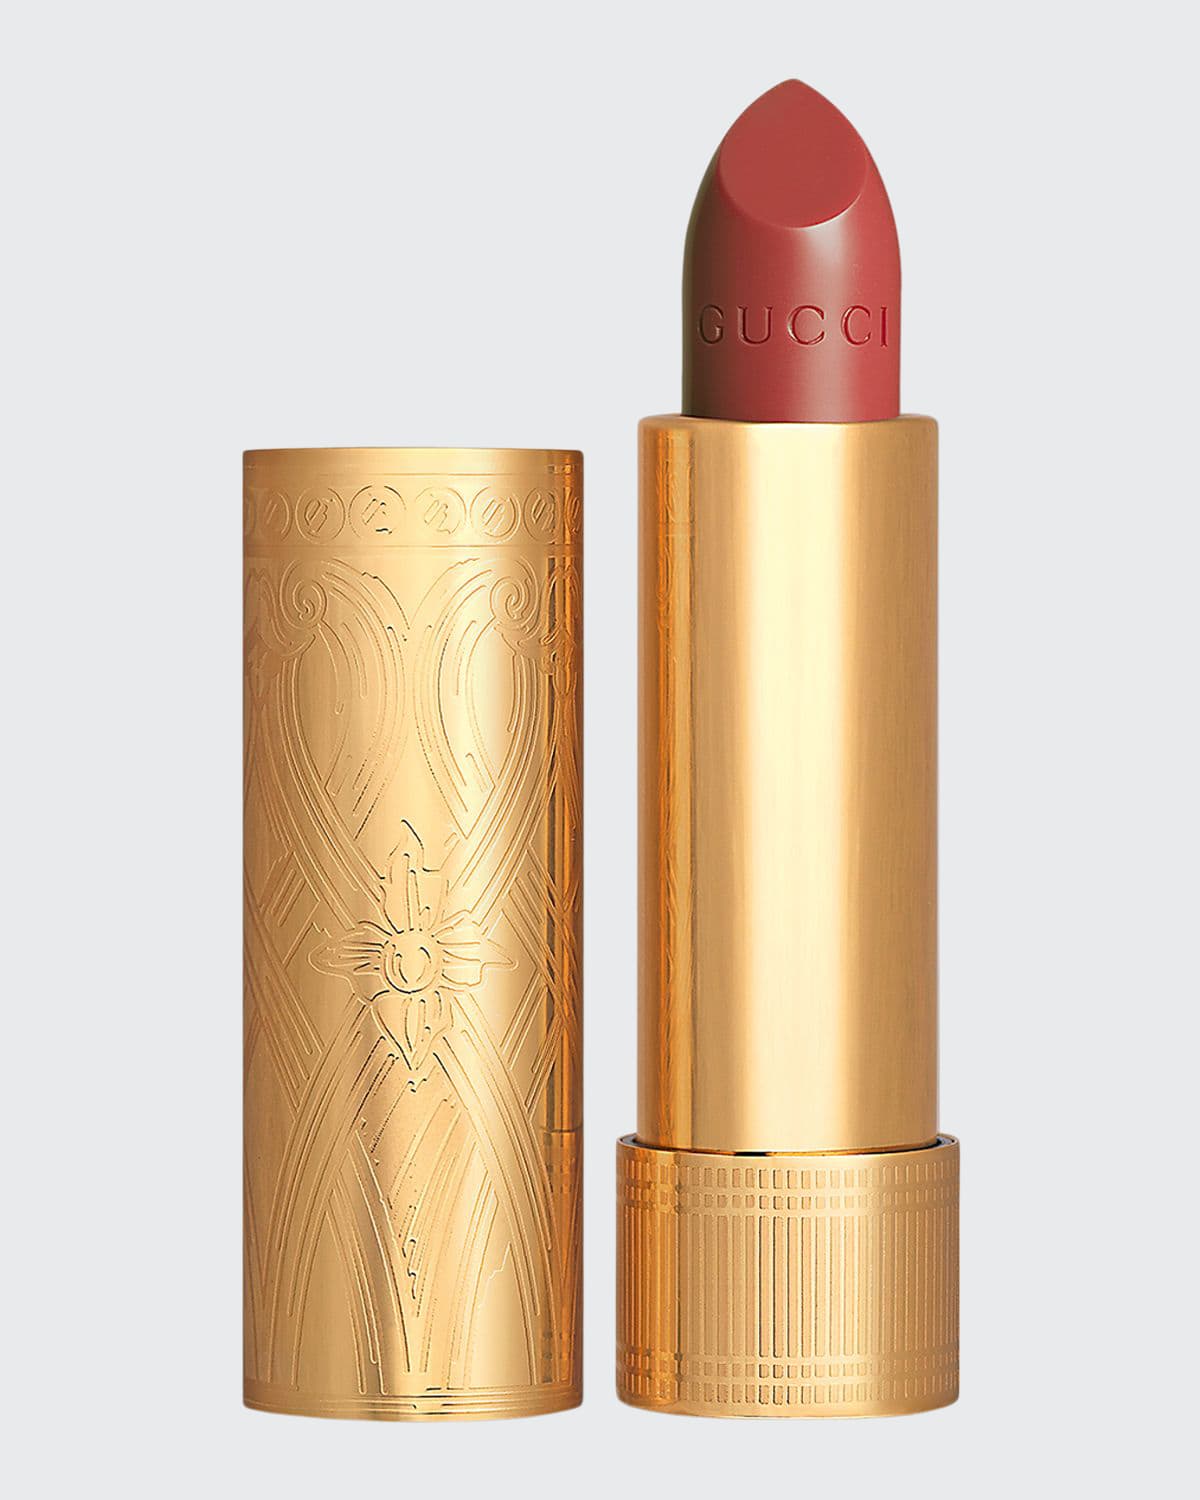 Gucci Rouge &#224 L&#232vres Satin Lipstick In 202 Moira Sienna